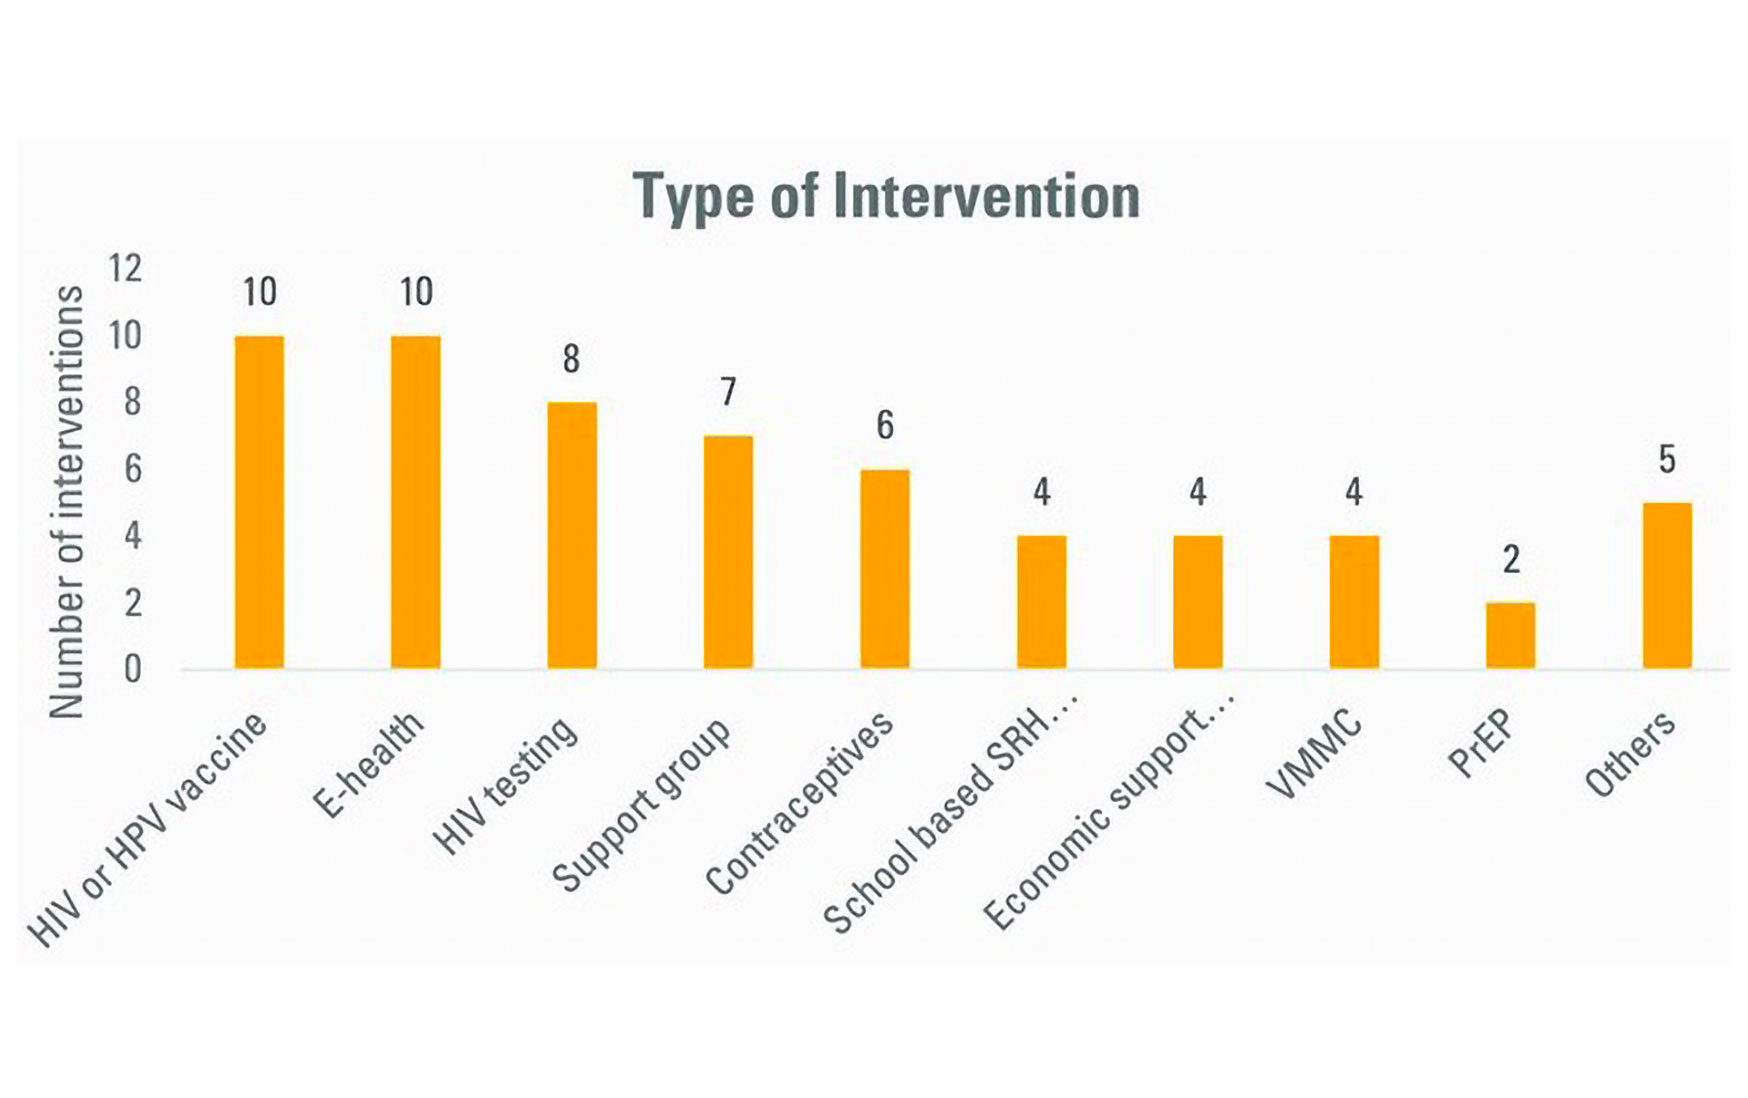 Types and numbers of intervention